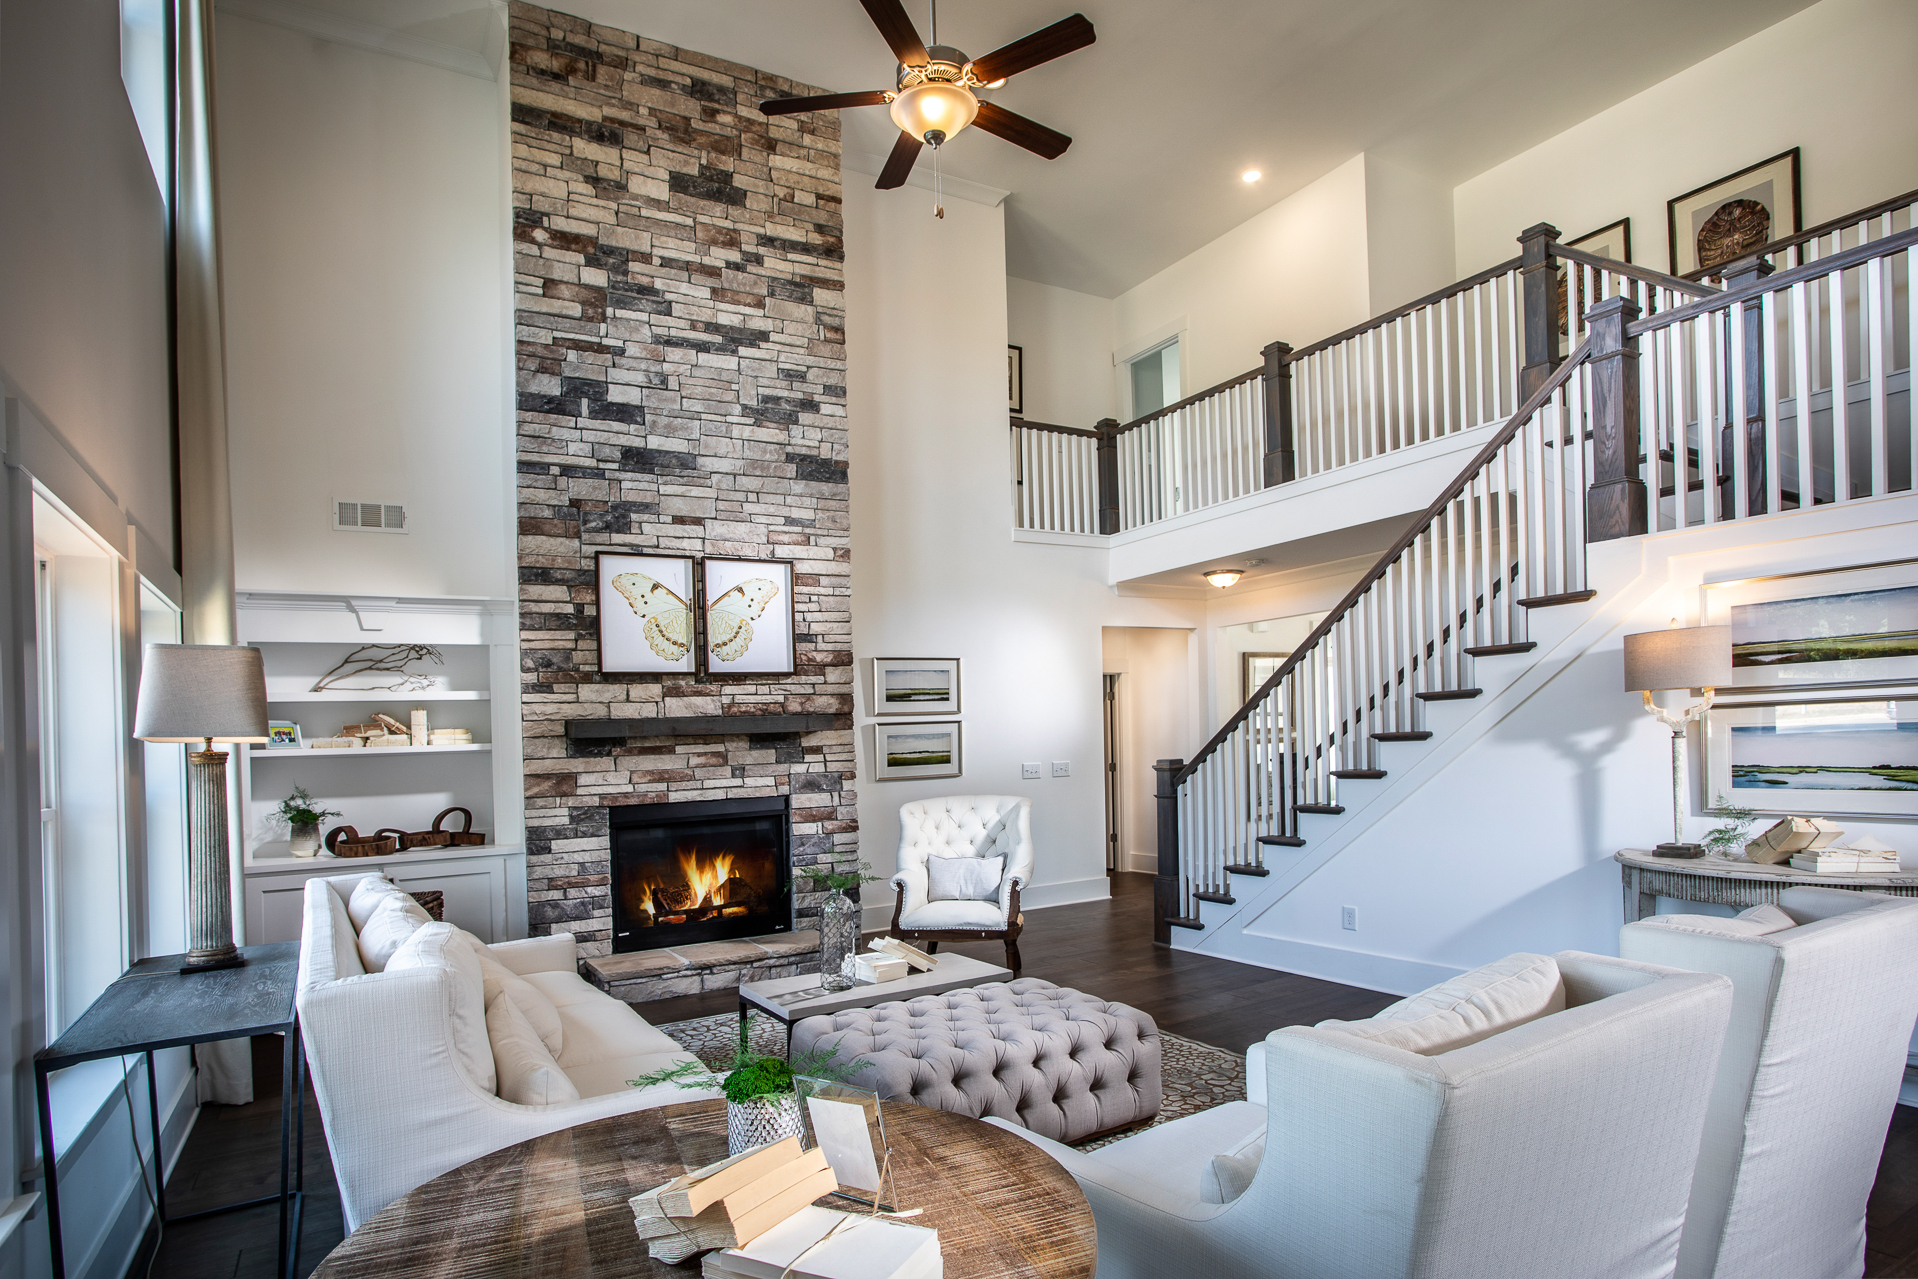 Model Home at Kennesaw’s Chestnut Farms Now Open to the Public - Paran ...